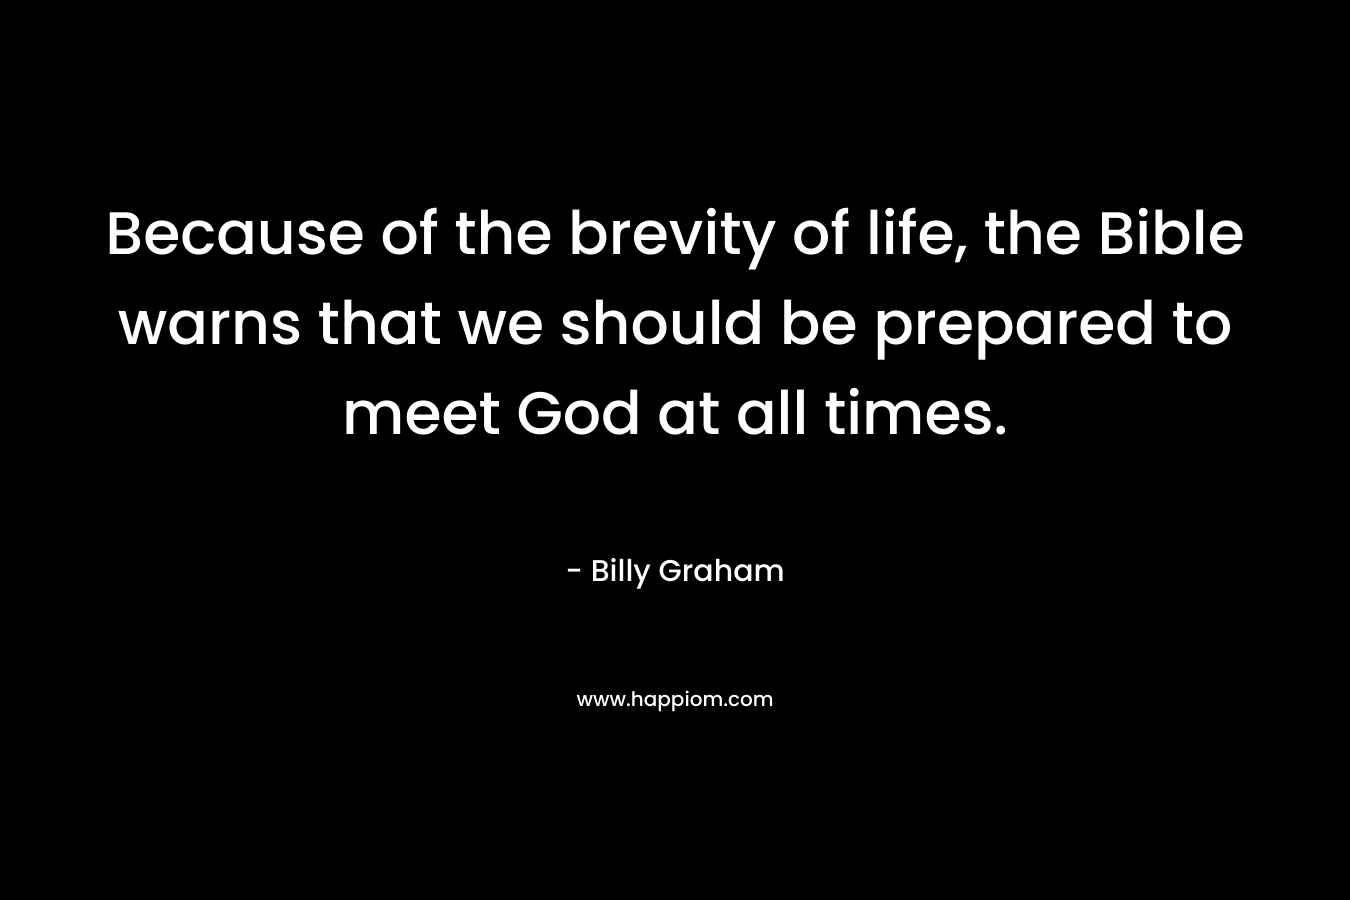 Because of the brevity of life, the Bible warns that we should be prepared to meet God at all times.